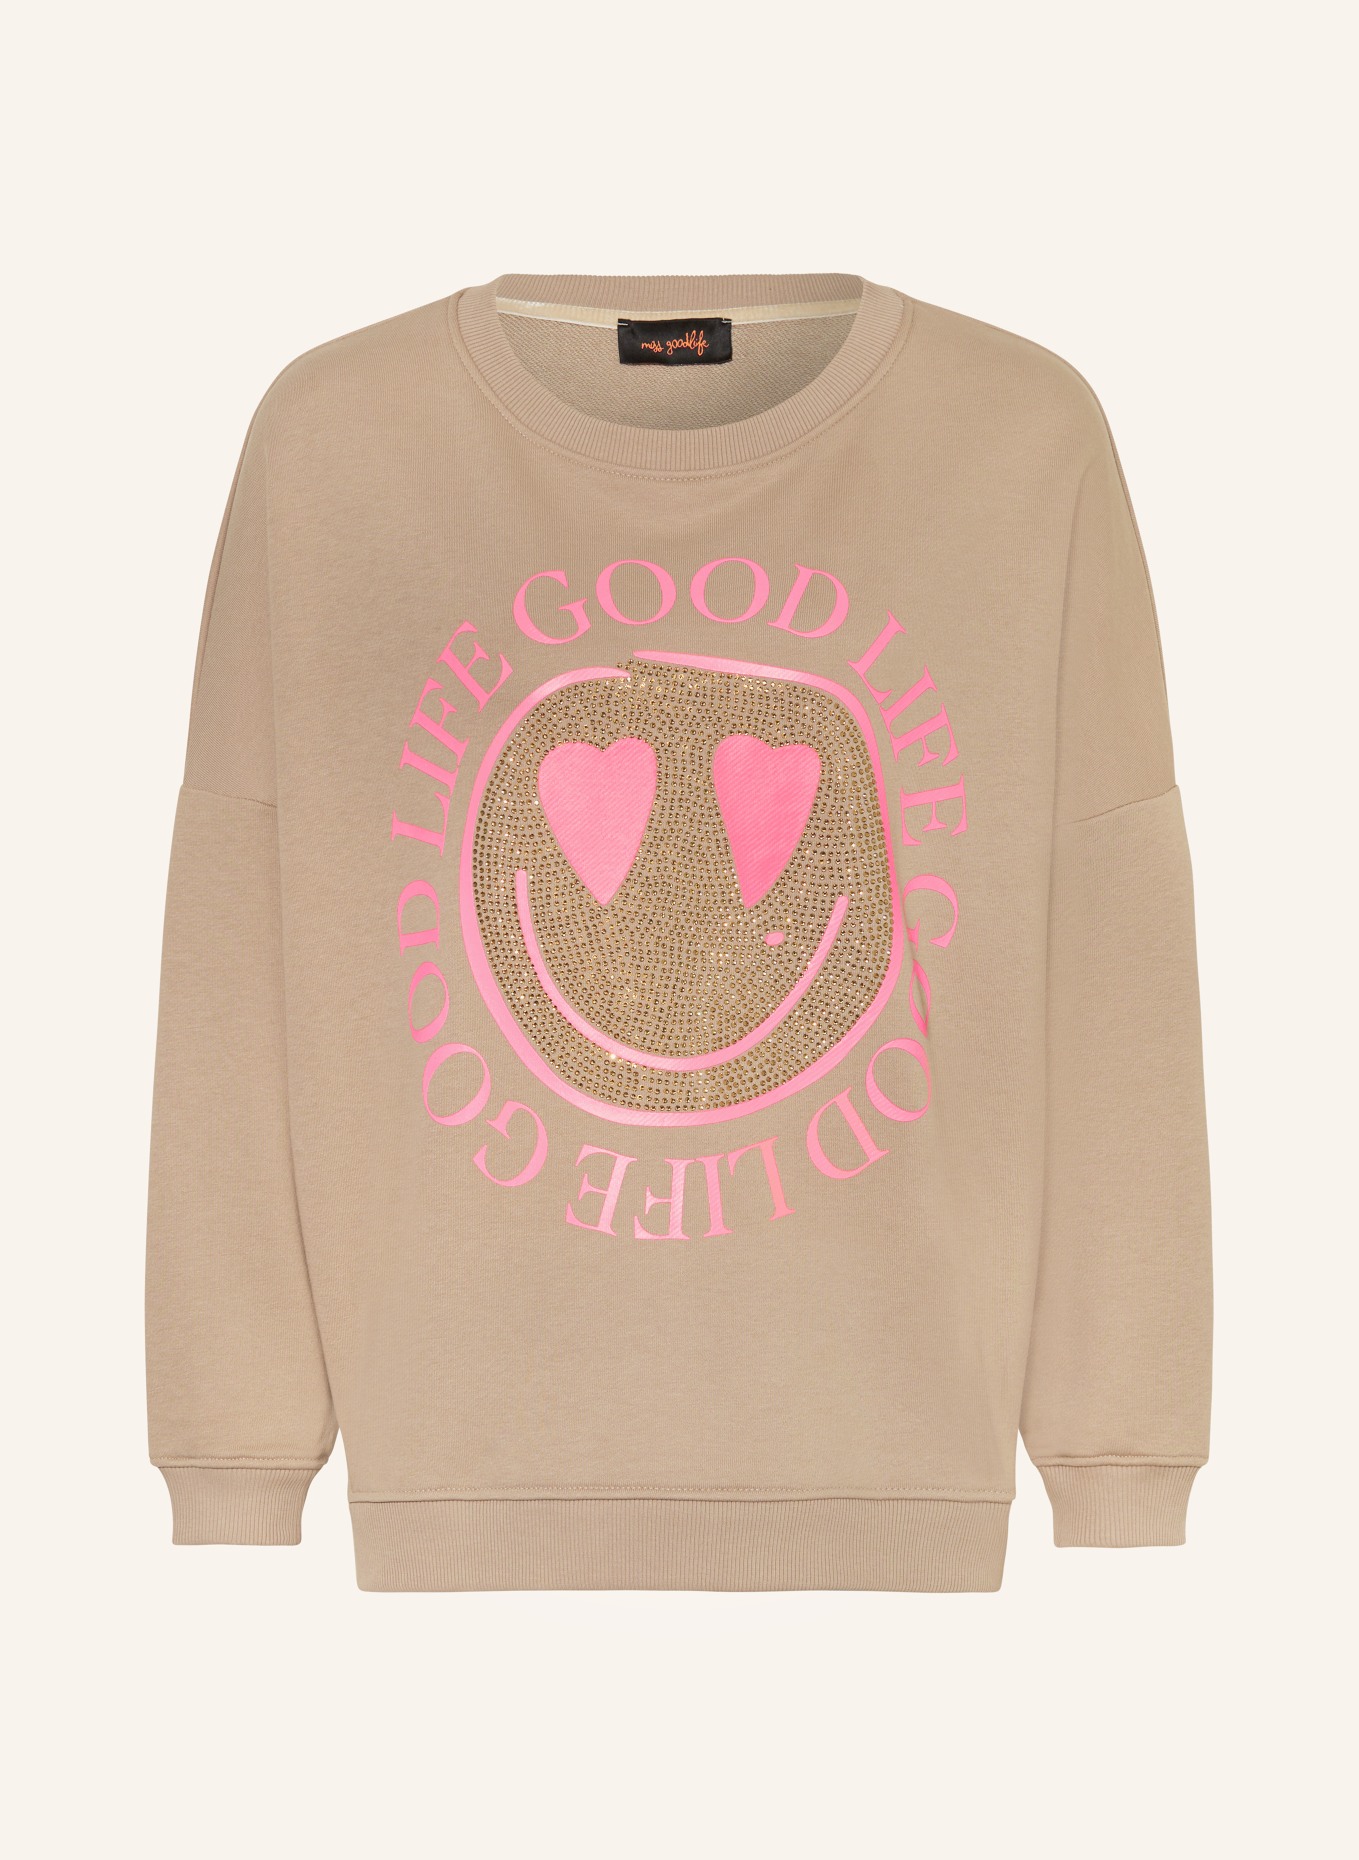 miss goodlife Sweatshirt with decorative gems, Color: LIGHT BROWN (Image 1)